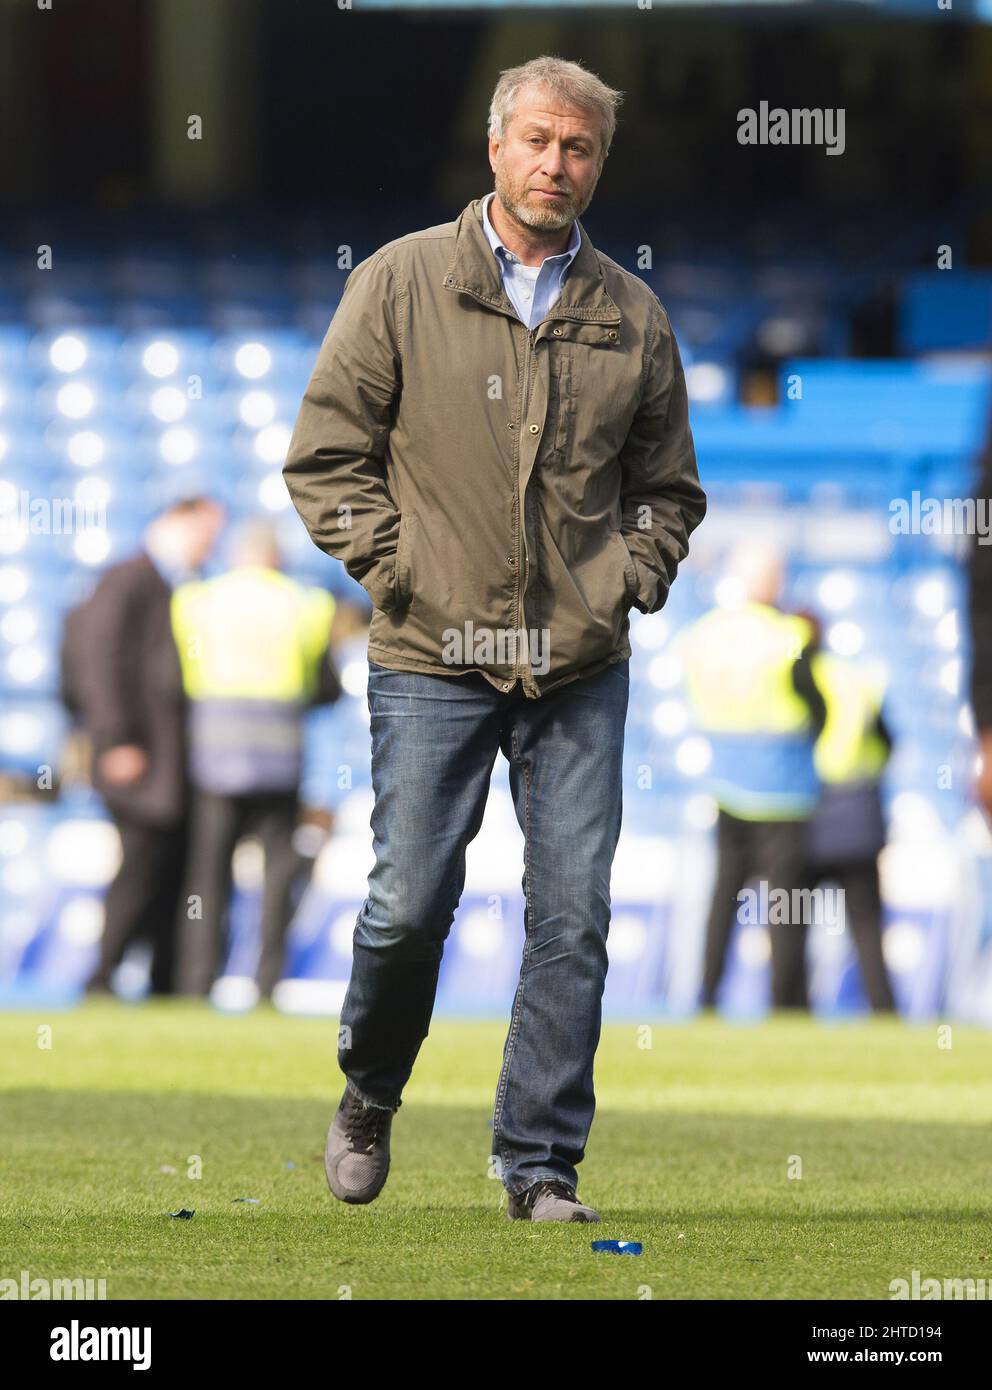 28 February 2022 - ROMAN ABRAMOVICH - CHELSEA FC   FILE PHOTO  ROMAN Abramovich WALKS ACROSS THE PITCH AT STAMFORD BRIDGE AFTER GOING IN TO SEE THE TEAM AFTER THE MATCH AS CHELSEA WIN THE PREMIERSHIP TITLE Chelsea v Crystal Palace Barclays Premiership - Stamford Bridge  Chelsea v Crystal Palace, Barclays Premier League, Stamford Bridge, London, Britain - 03 May 2015 Picture : © Mark Pain / Alamy Live News Stock Photo